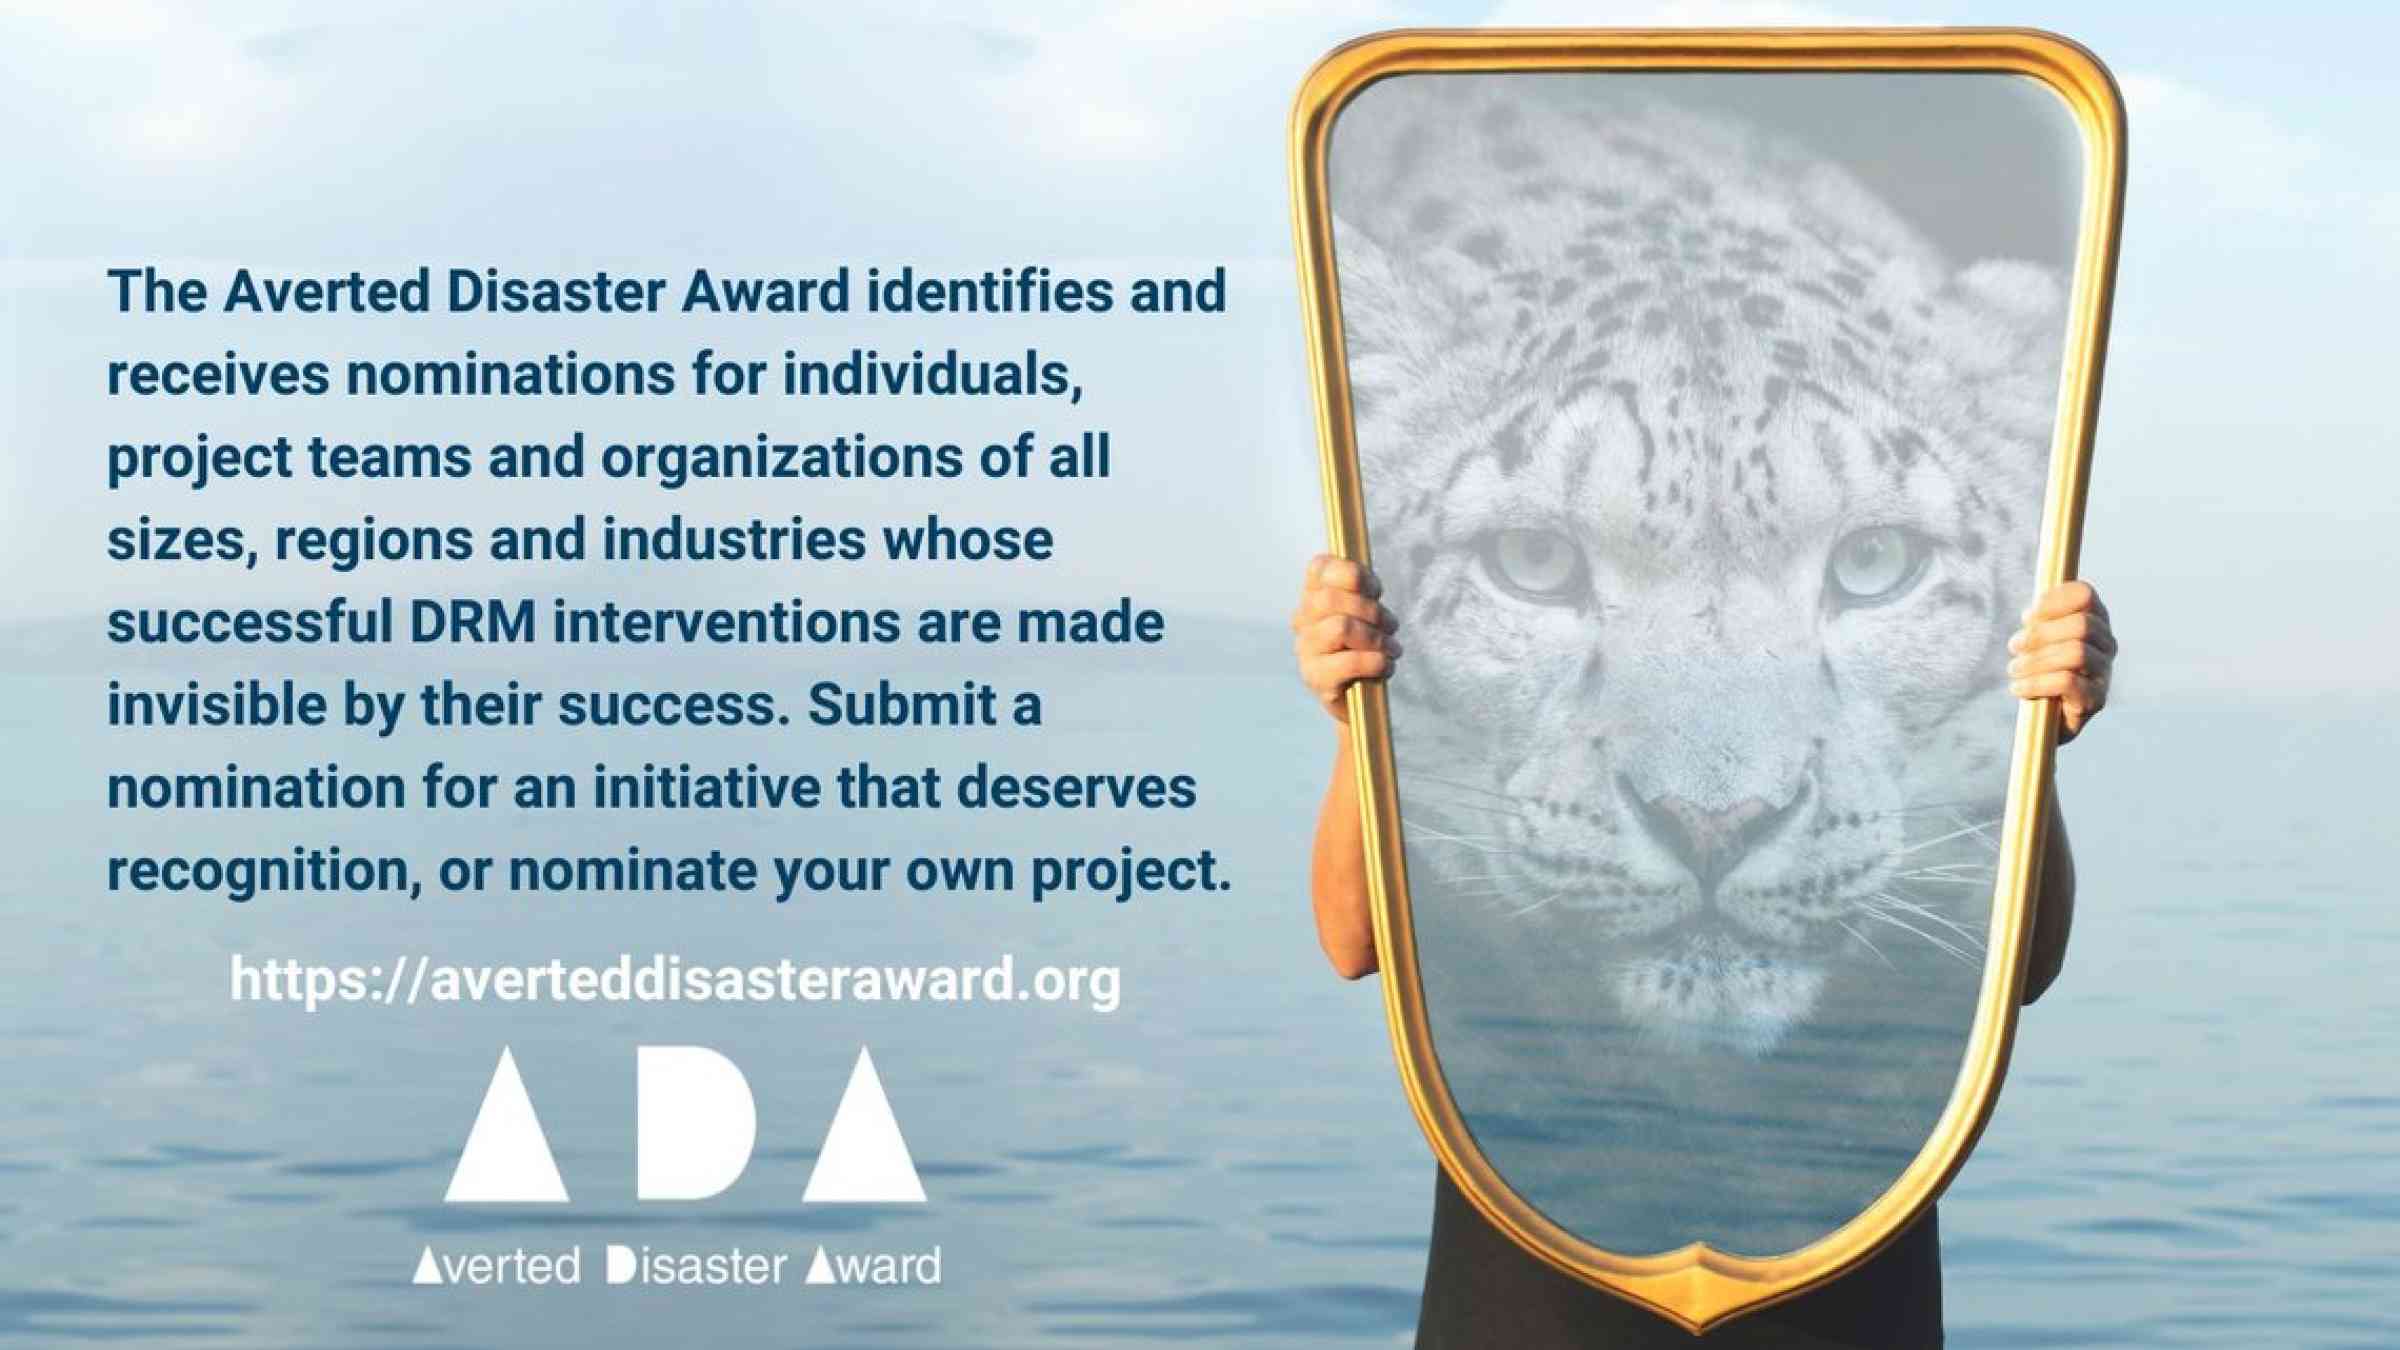 The Averted Disaster Award identifies and receives nominations for individuals, project teams and organizations of  all sizes, regions and industries whose successful DRM interventions are made invisible by their success. Submit a nomination for an initiative that deserves recognition, or nominate your own project.